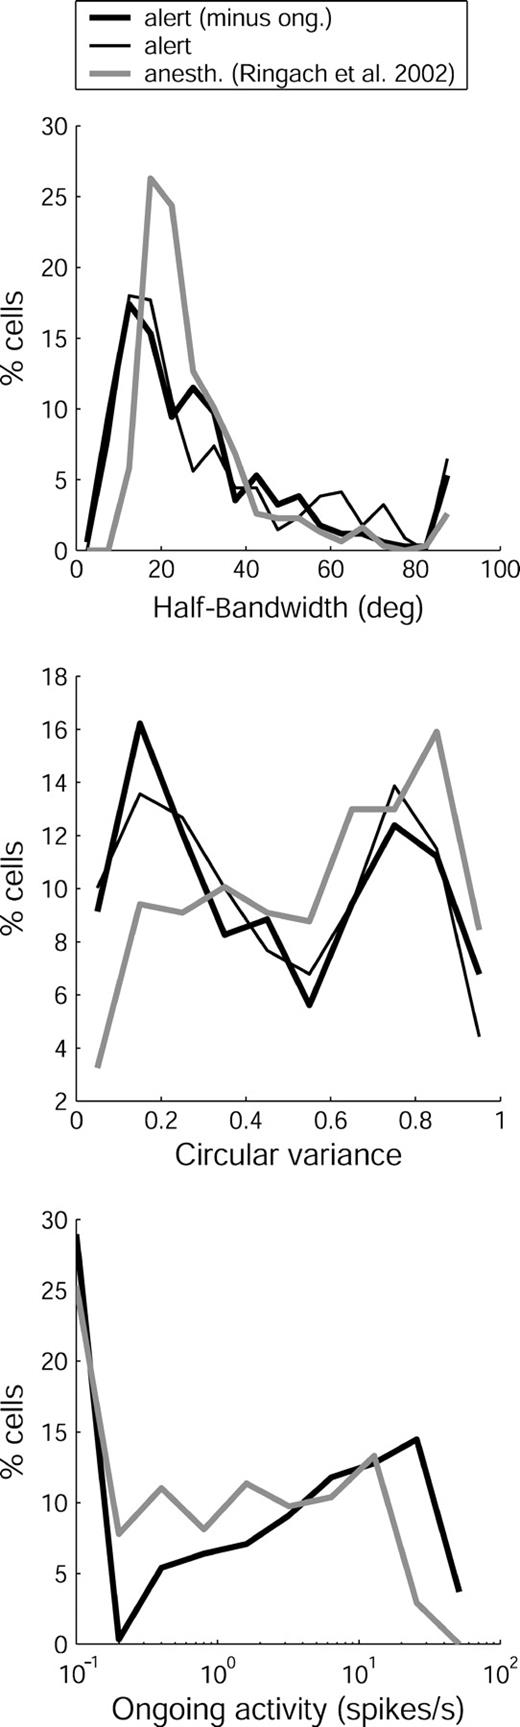 Comparison of results from alert (our study) and anesthetized (Ringach et al., 2002b) monkeys. Top panel: Black lines. Half-bandwidth of V1 neurons in alert monkeys (n = 339), with subtraction (thick line) and without subtraction (thin line) of ongoing activity (ong.). Gray line. Half-bandwidth of V1 neurons in anesthetized monkeys (n = 308) without subtraction of ongoing activity. Data from alert monkeys were collected with drifting bars as described in the Materials and Methods, and control experiments were conducted with drifting gratings, as described in the Results. Data from anesthetized monkeys were collected with drifting gratings. Middle panel: Circular variance for the same sets of neurons. Bottom panel: Distributions of ongoing activity of V1 neurons in alert (n = 297) and anesthetized (n = 308) monkeys. Data were collected during viewing of a blank, uniform field of 1 cd/m2 for alert monkeys and 55–65 cd/m2 for anesthetized ones. Cells with no ongoing activity were assigned a value of 0.1 to accommodate the log scale. Values in all panels are plotted as percentages of the total sample for ease of comparison. Note that for alert monkeys, the distributions of HBW and CV are similar whether or not ongoing activity is subtracted from the responses (r = 0.92, r = 0.88, respectively, P < 0.01).